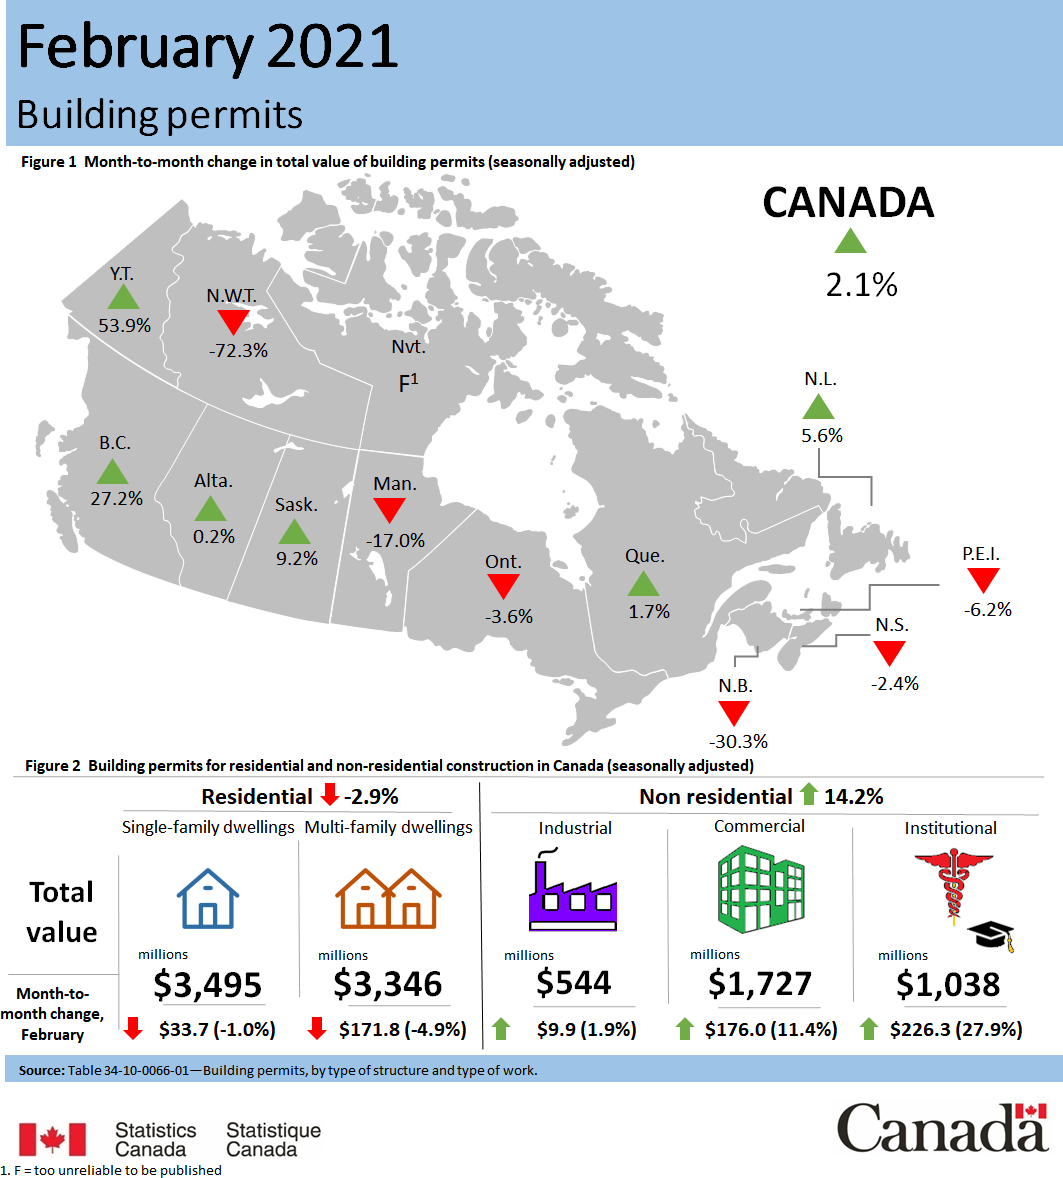 Thumbnail for Infographic 1: Building permits, February 2021